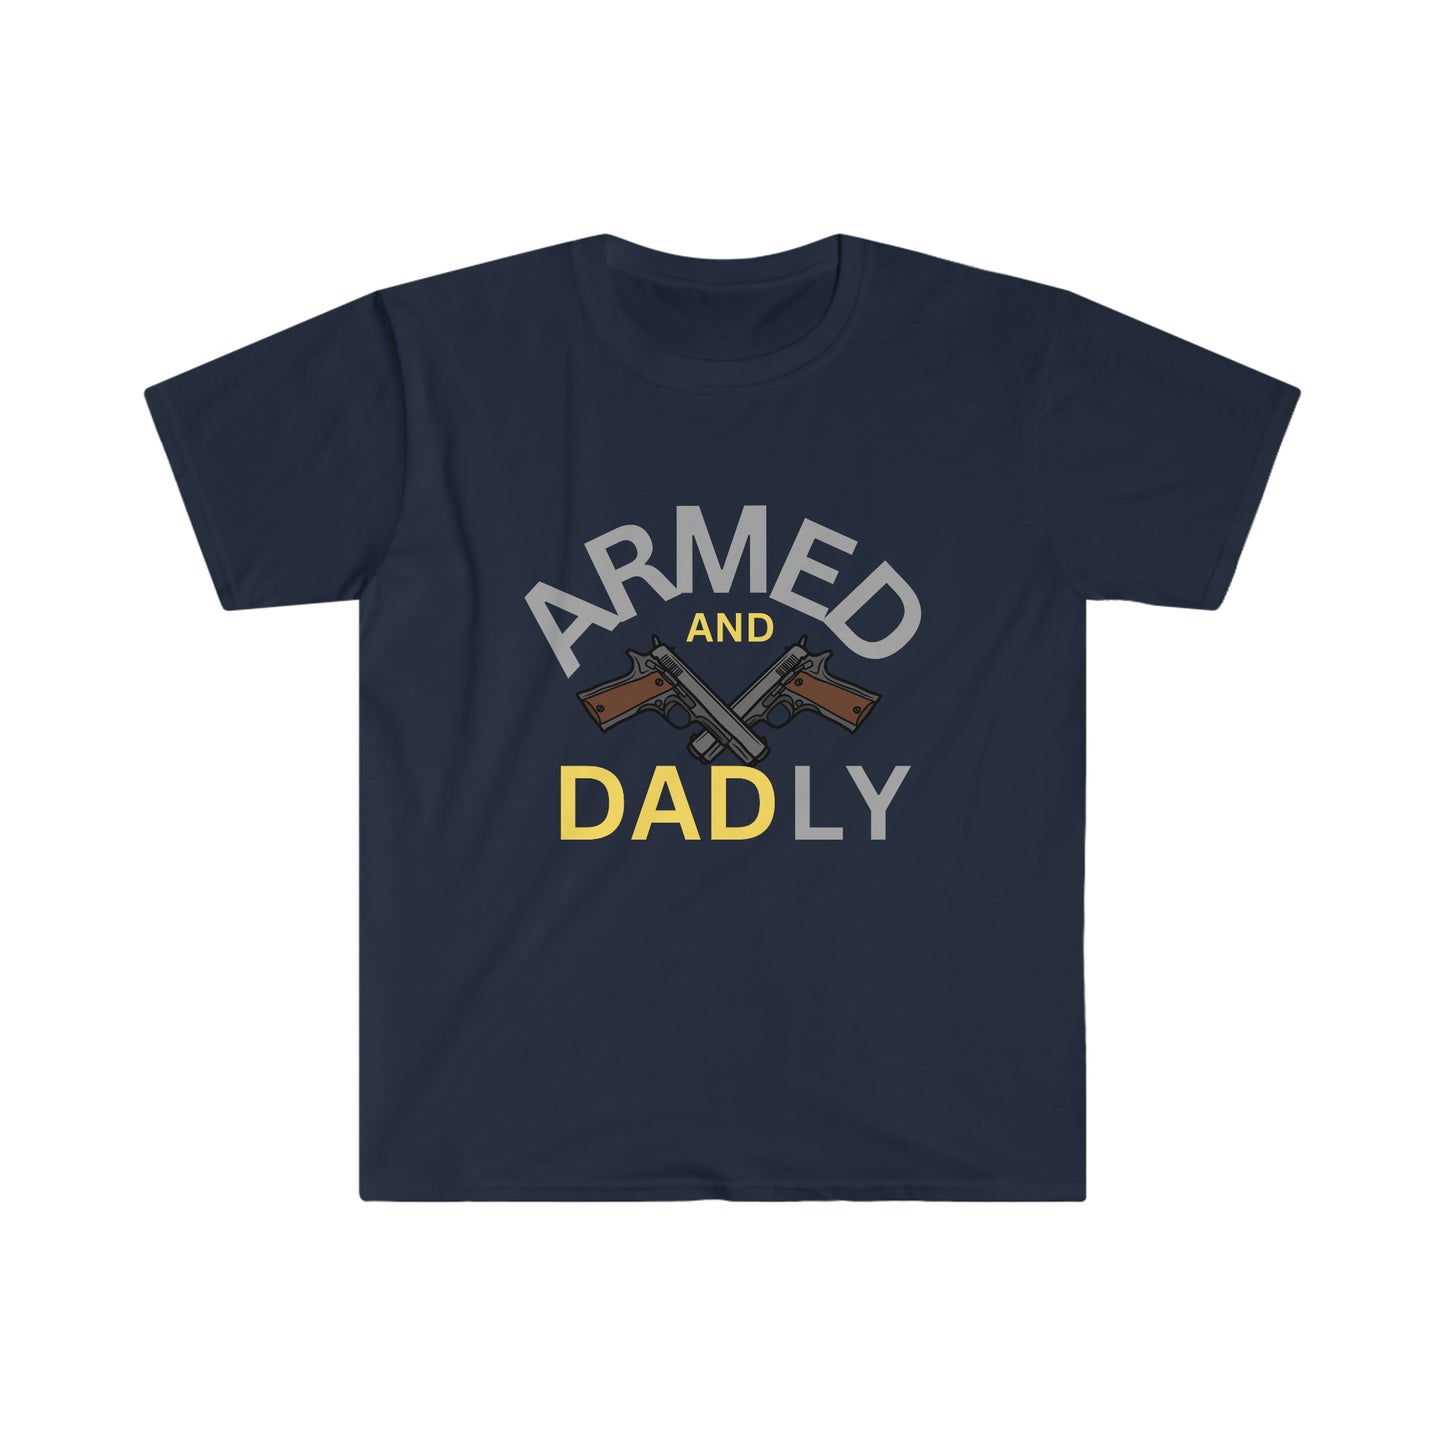 Gift For Dad-"Armed and Dadly T- shirt